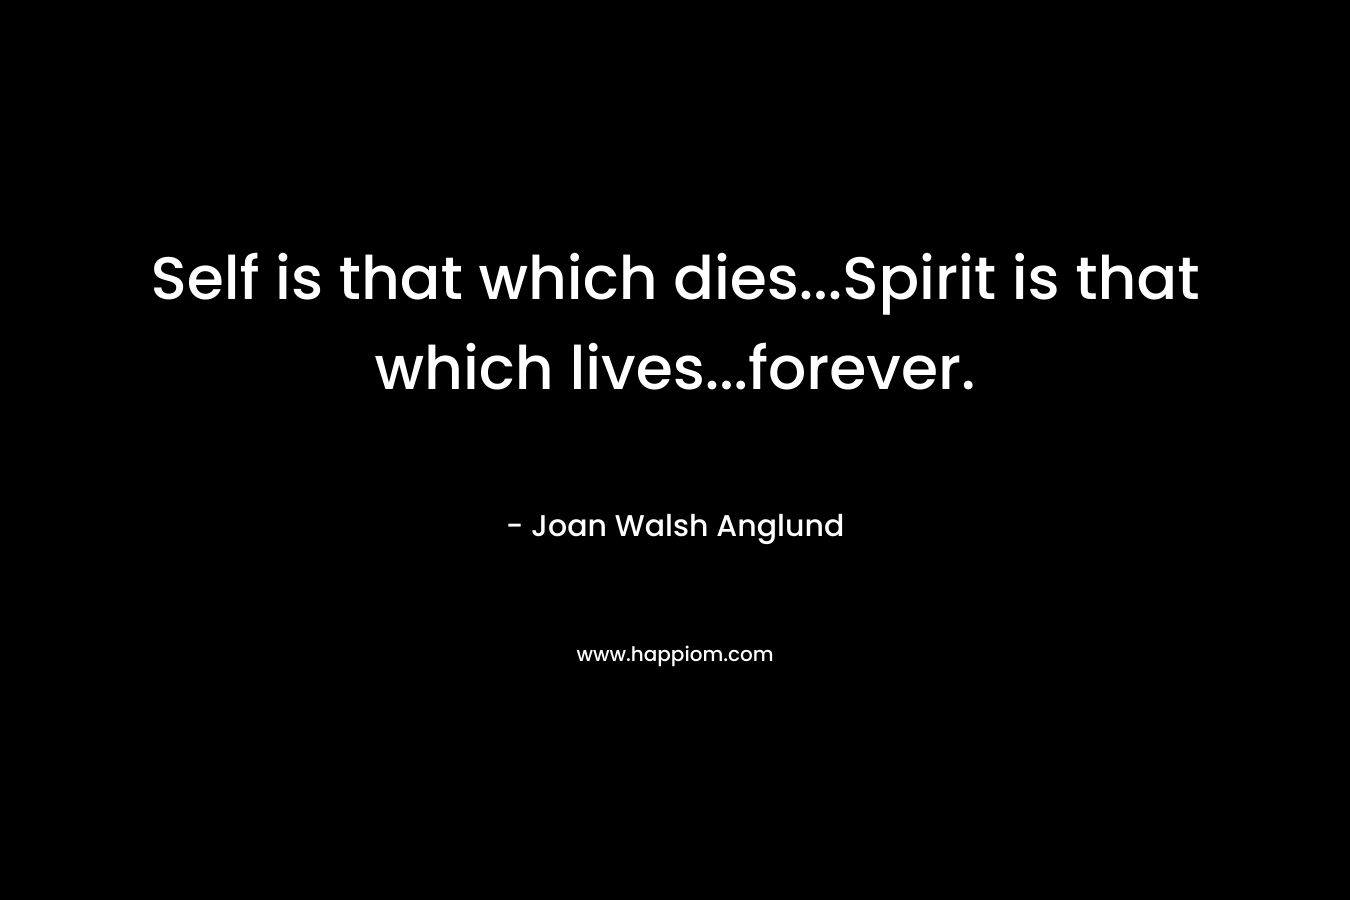 Self is that which dies...Spirit is that which lives...forever.